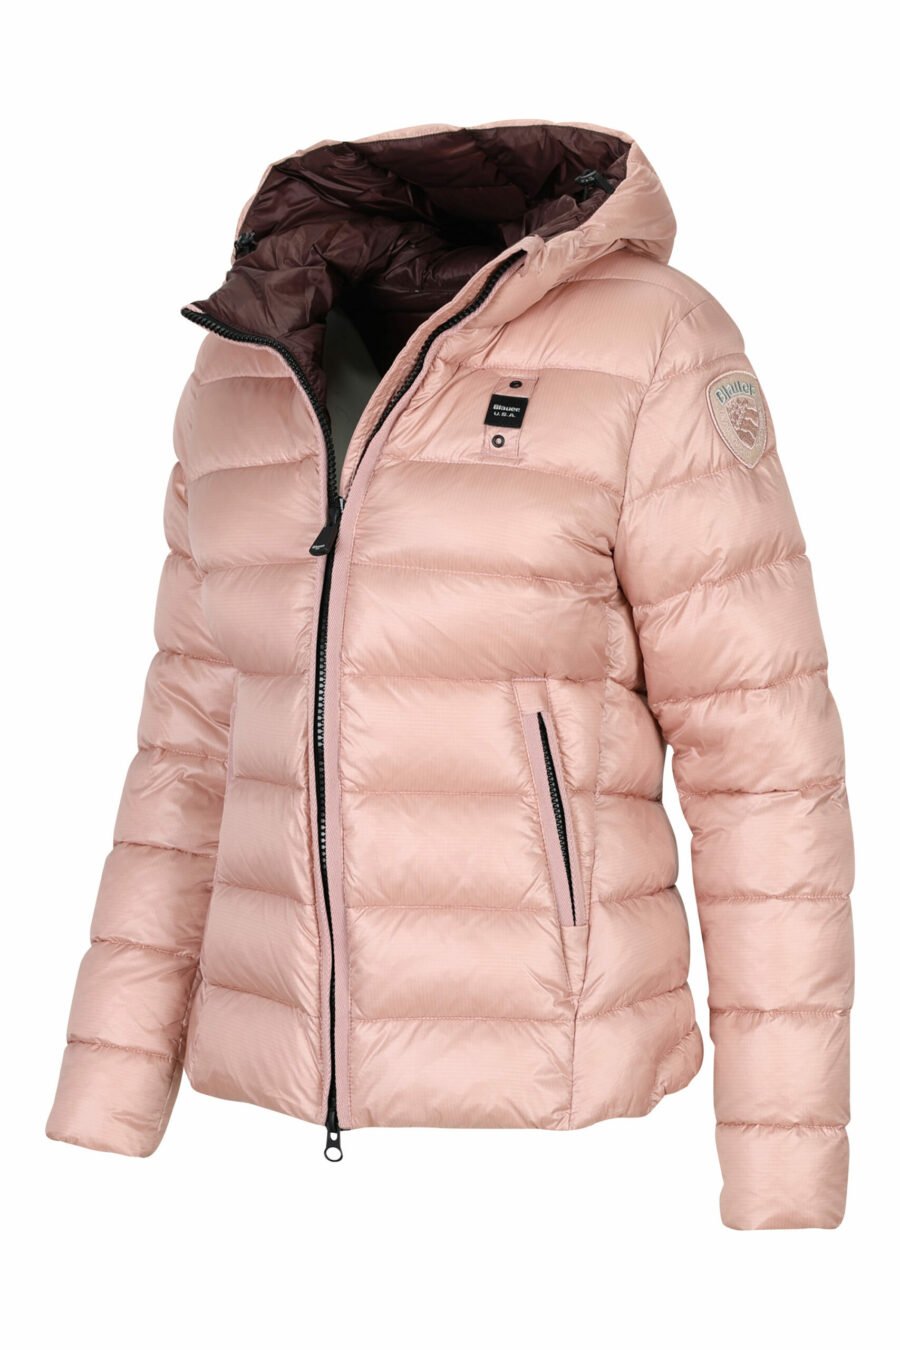 Pale pink straight lined hooded jacket with purple inside with logo patch - 8058610675660 2 scaled